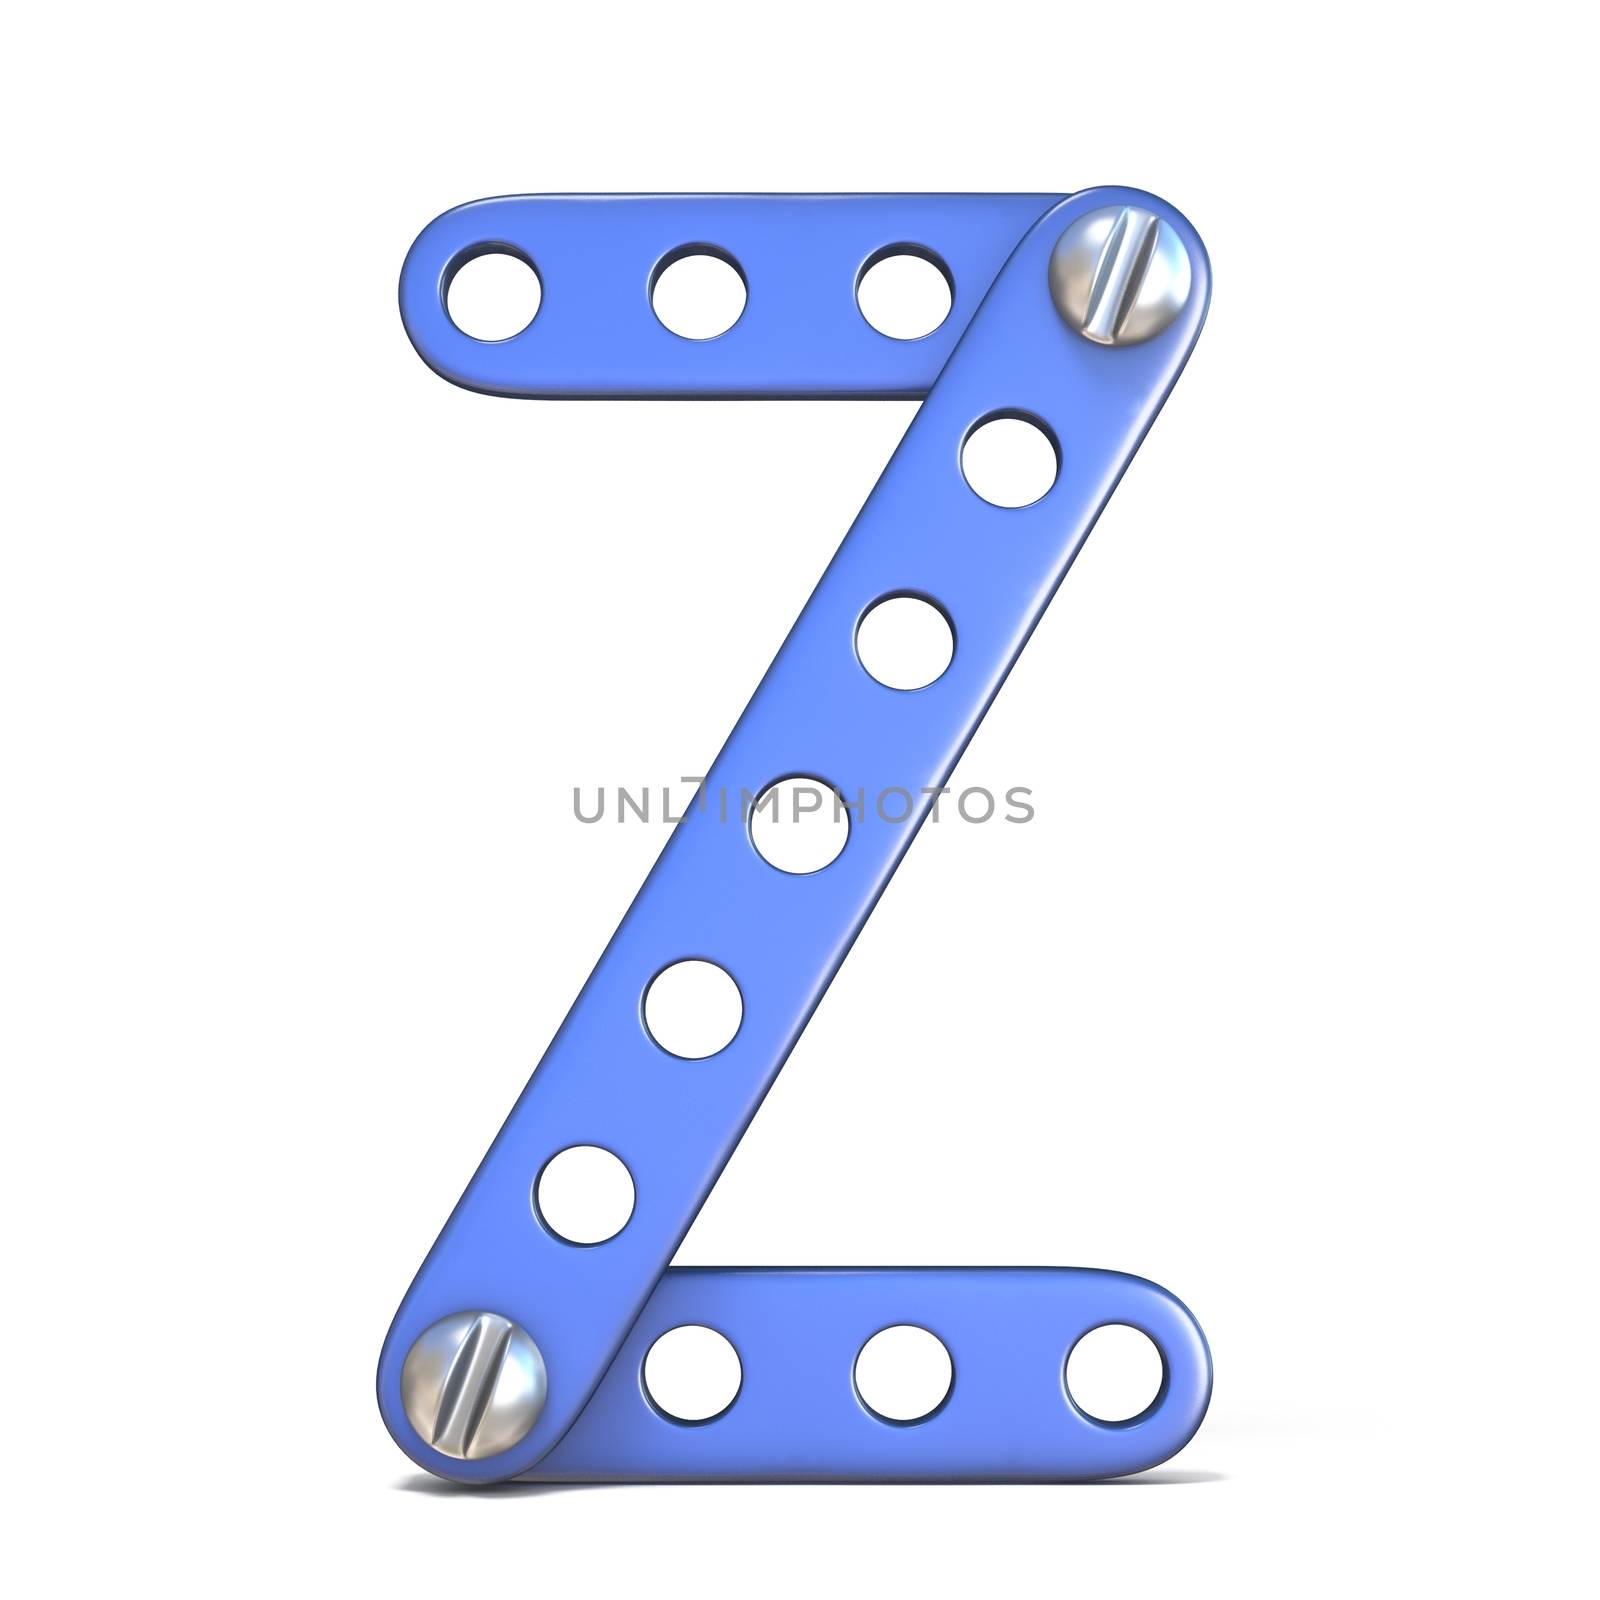 Alphabet made of blue metal constructor toy Letter Z 3D render illustration isolated on white background